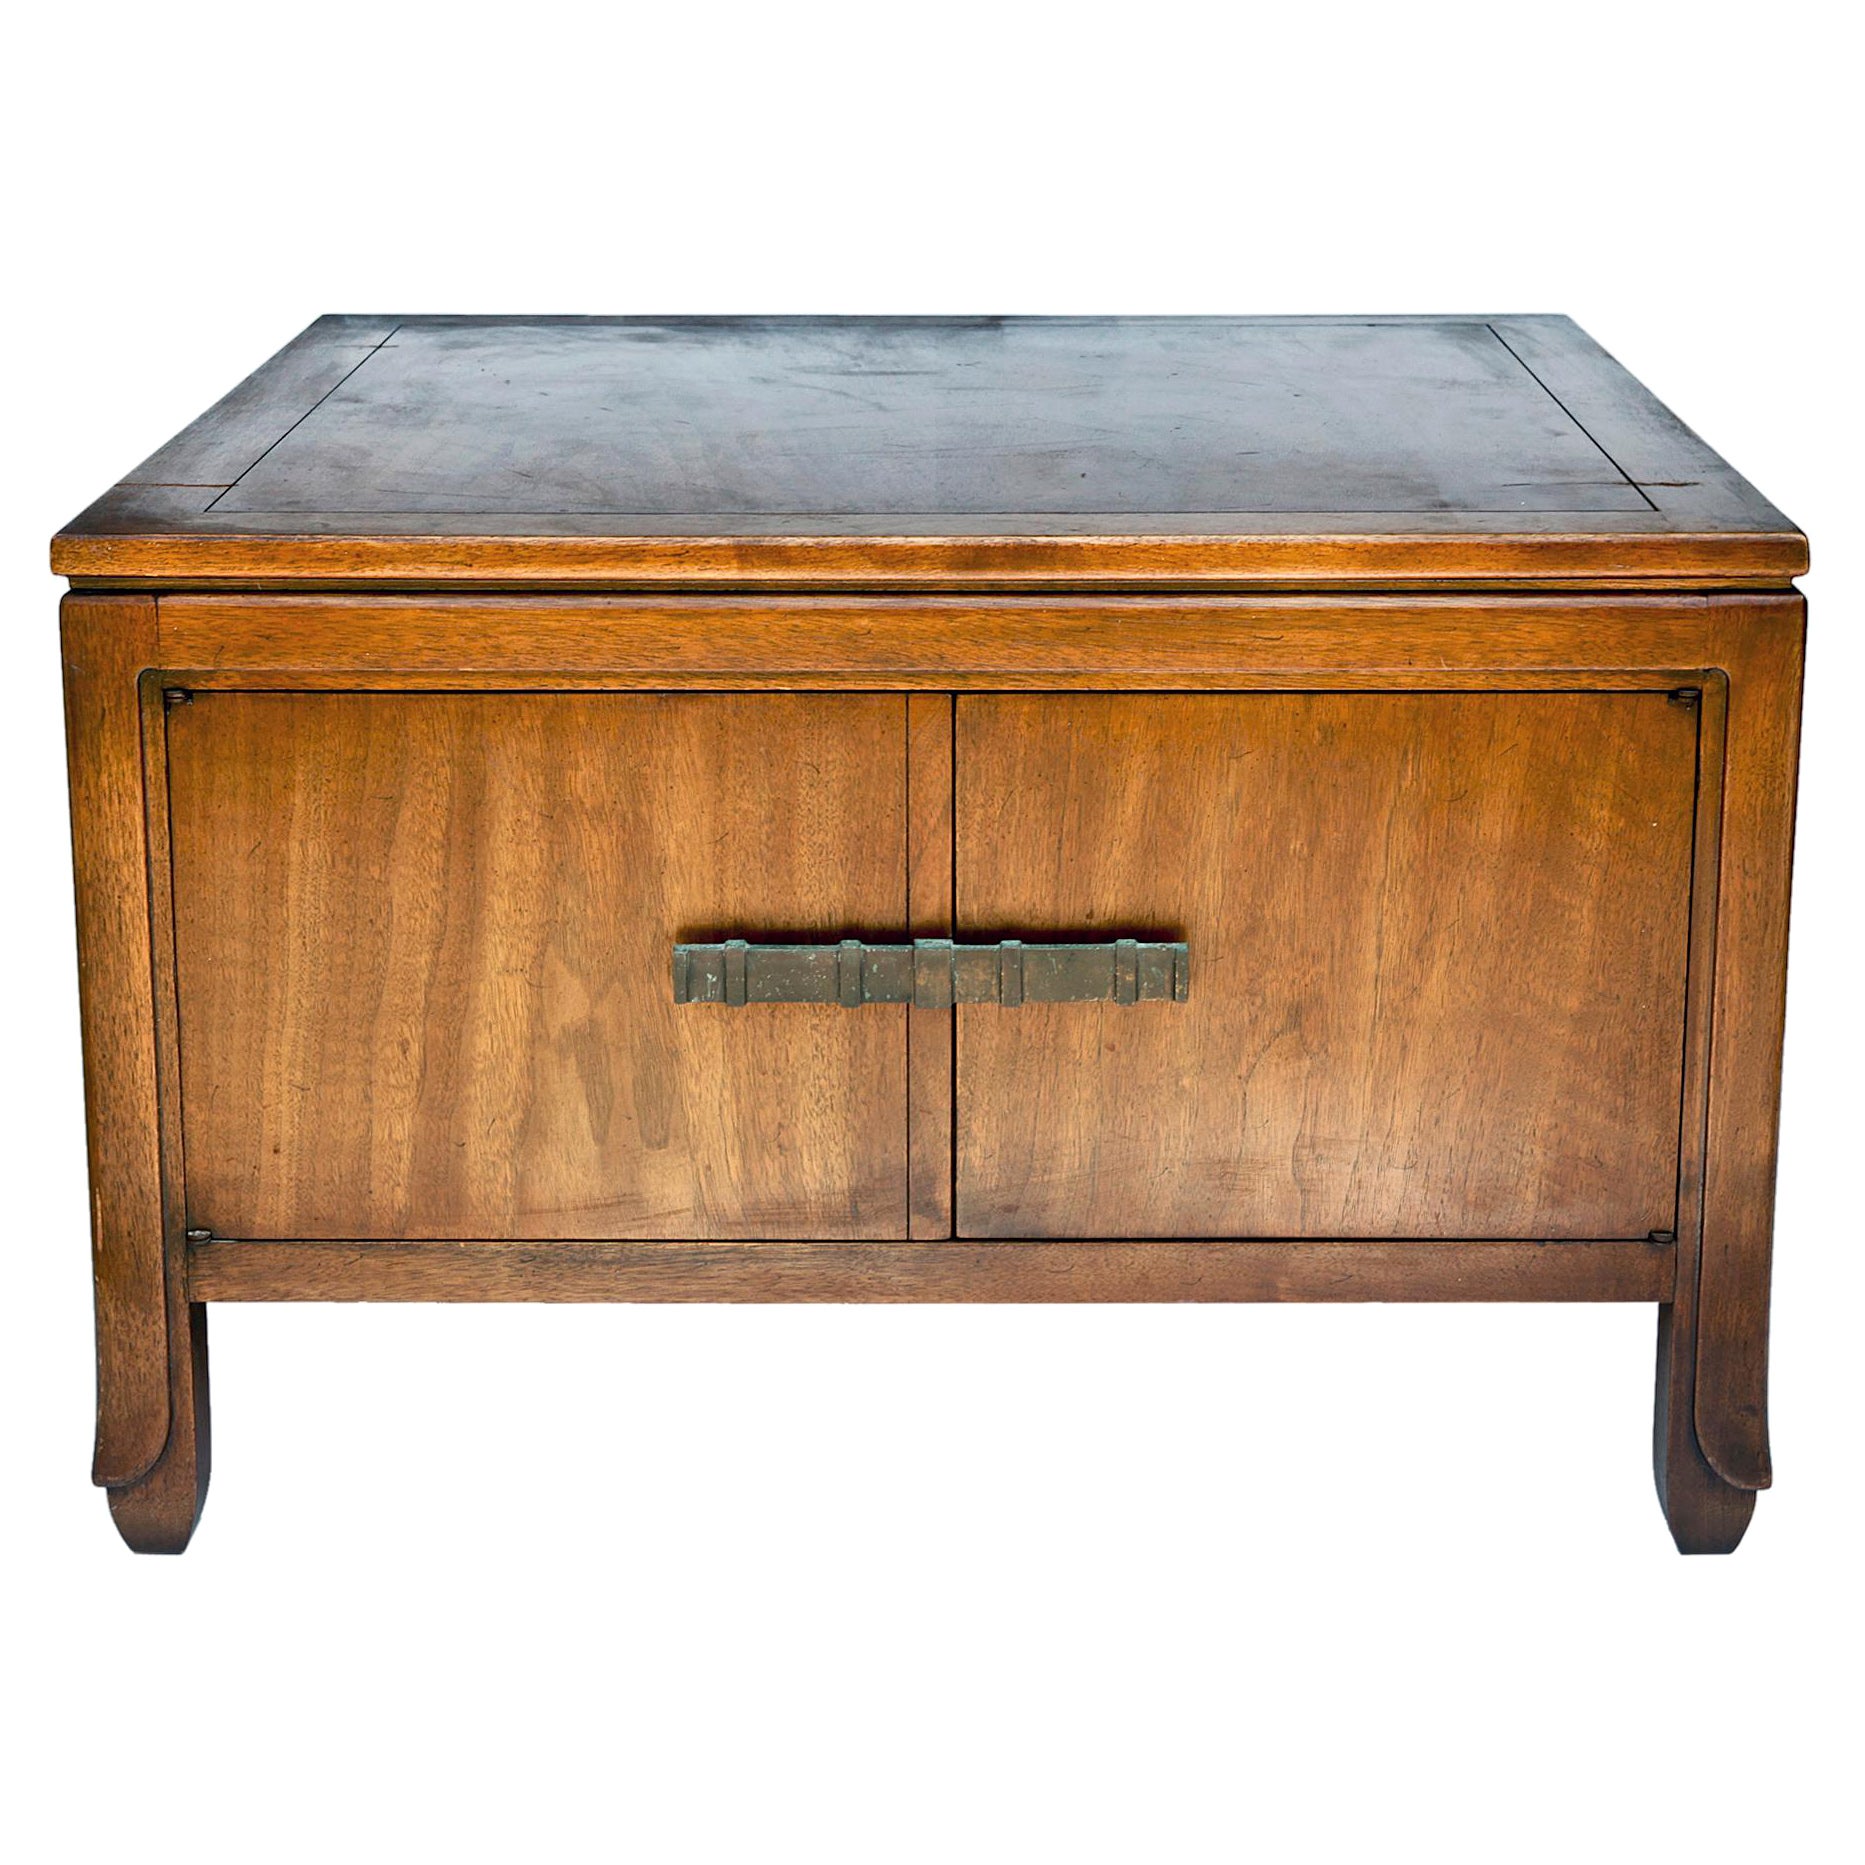 Oversized square midcentury side, end or coffee table with tons of storage. 
Quality piece has two front doors with stylish hardware. 
Nice solid wood nice Mid-Century Modern look. 
The perfect Size for next to a sofa with a low arm.